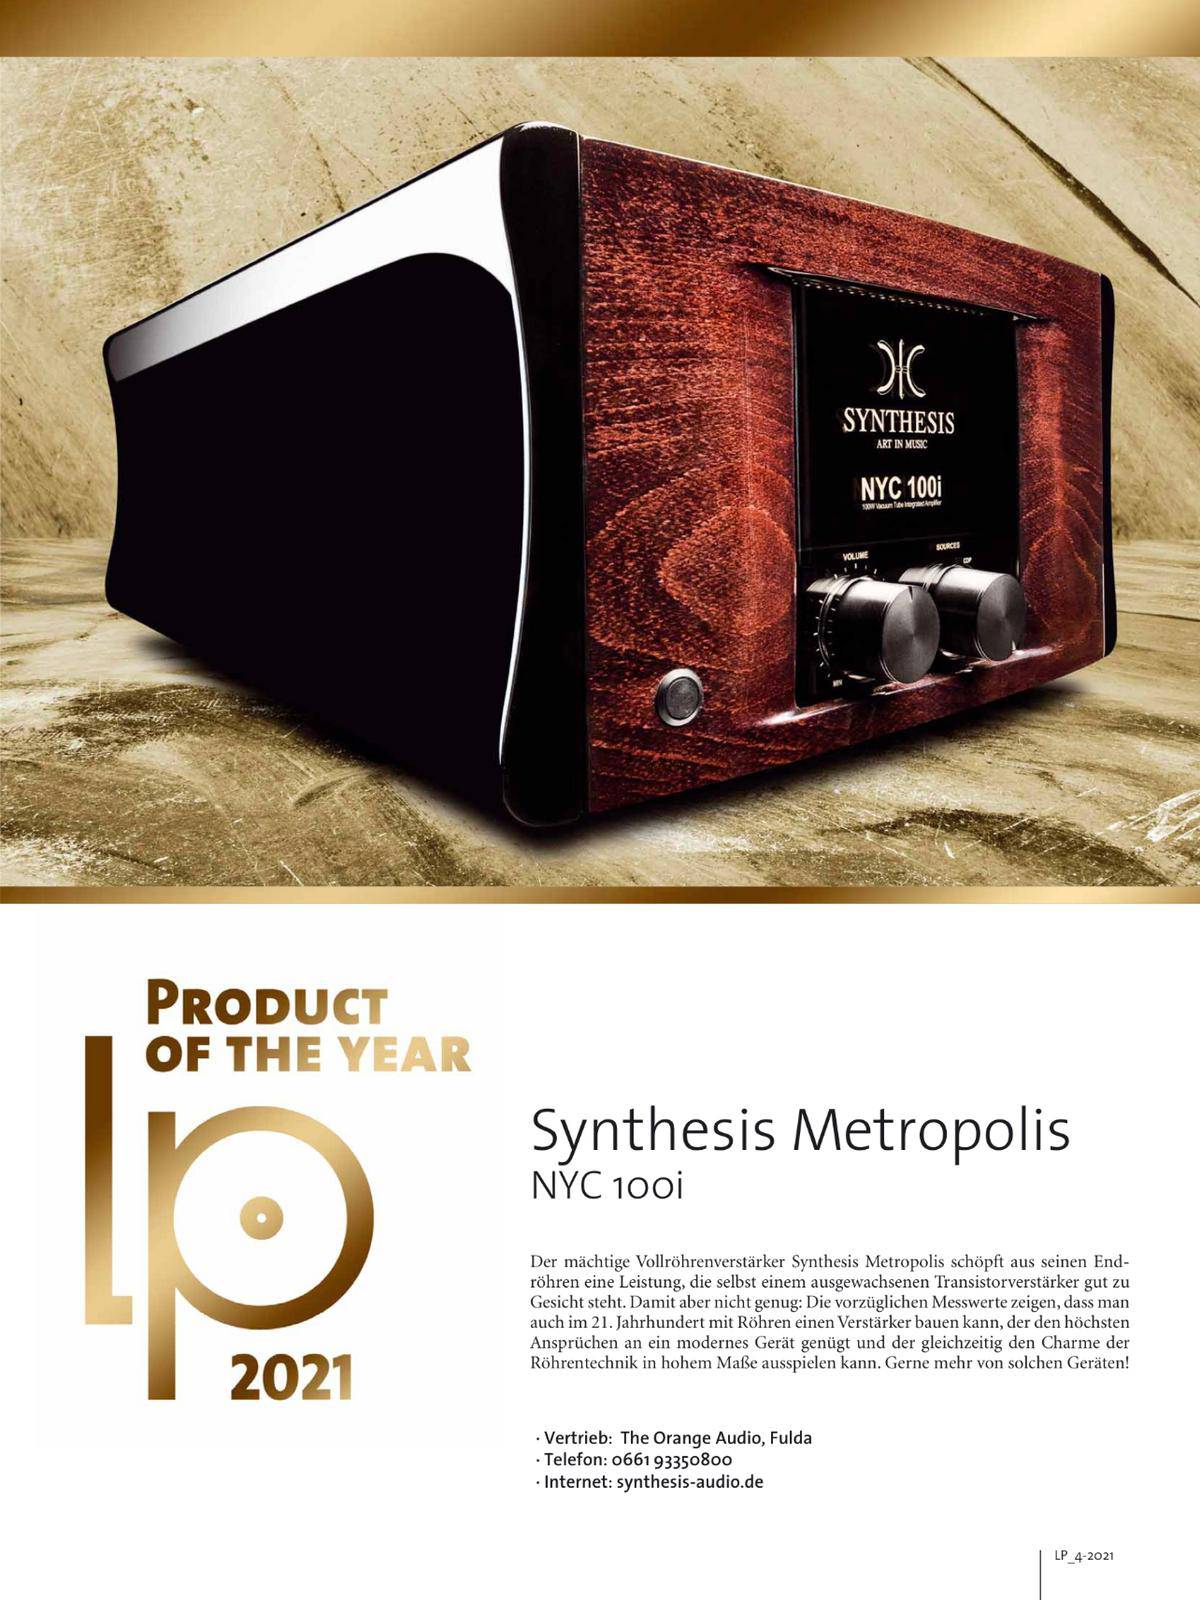 Synthesis NYC 100i